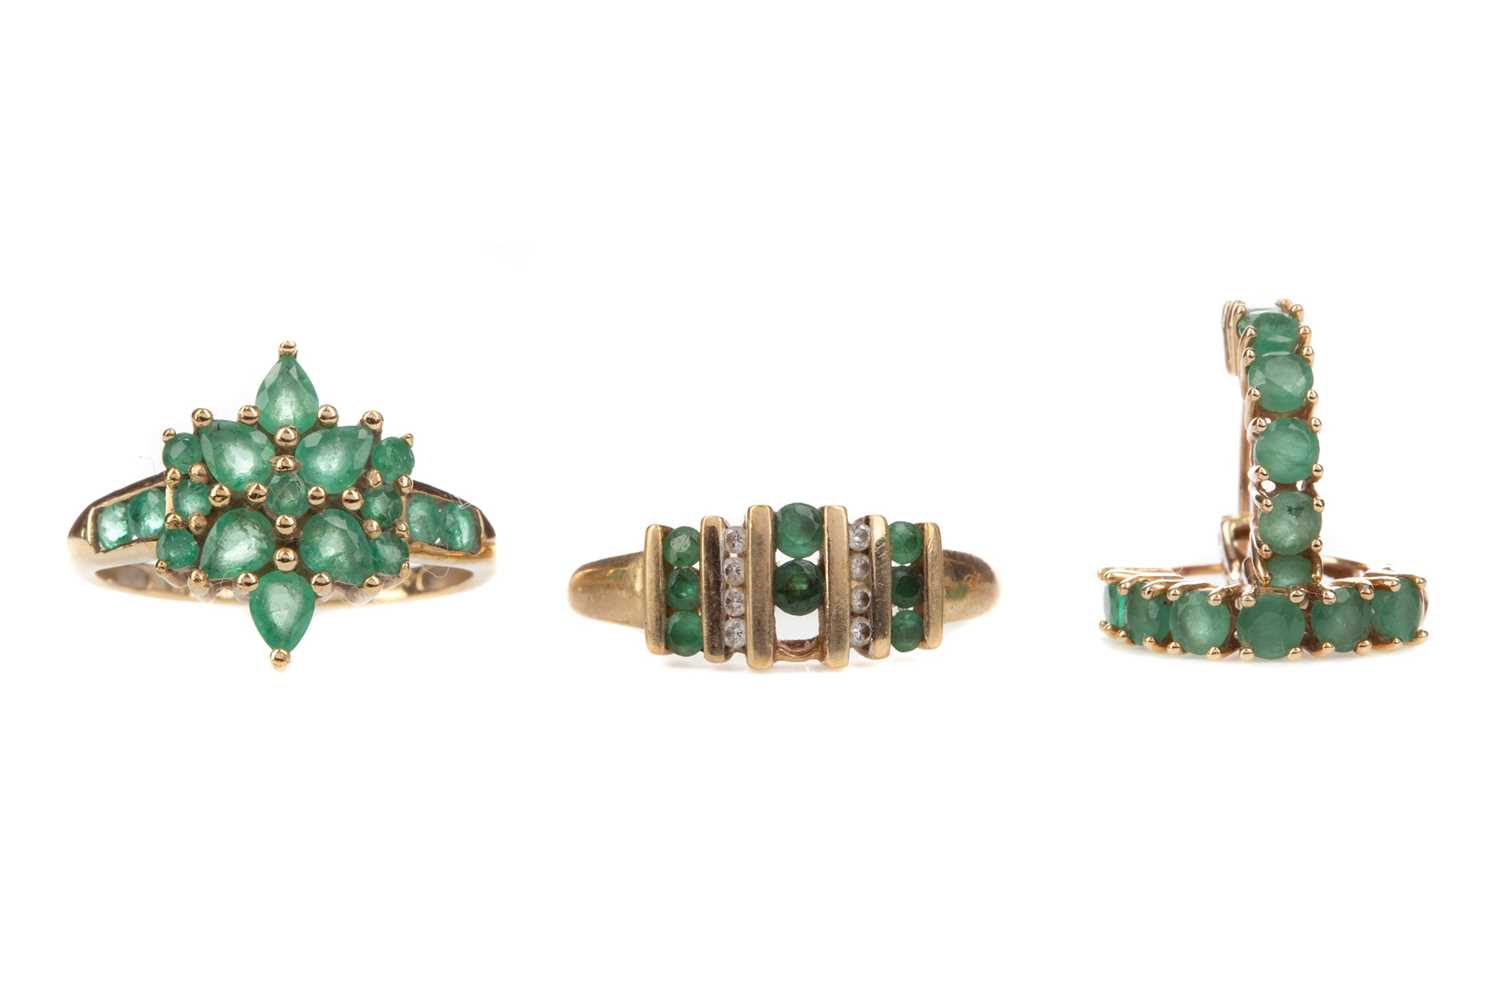 Lot 405 - AN EMERALD RING AND EARRINGS ALONG WITH A PARTIAL EMERALD AND DIAMOND RING